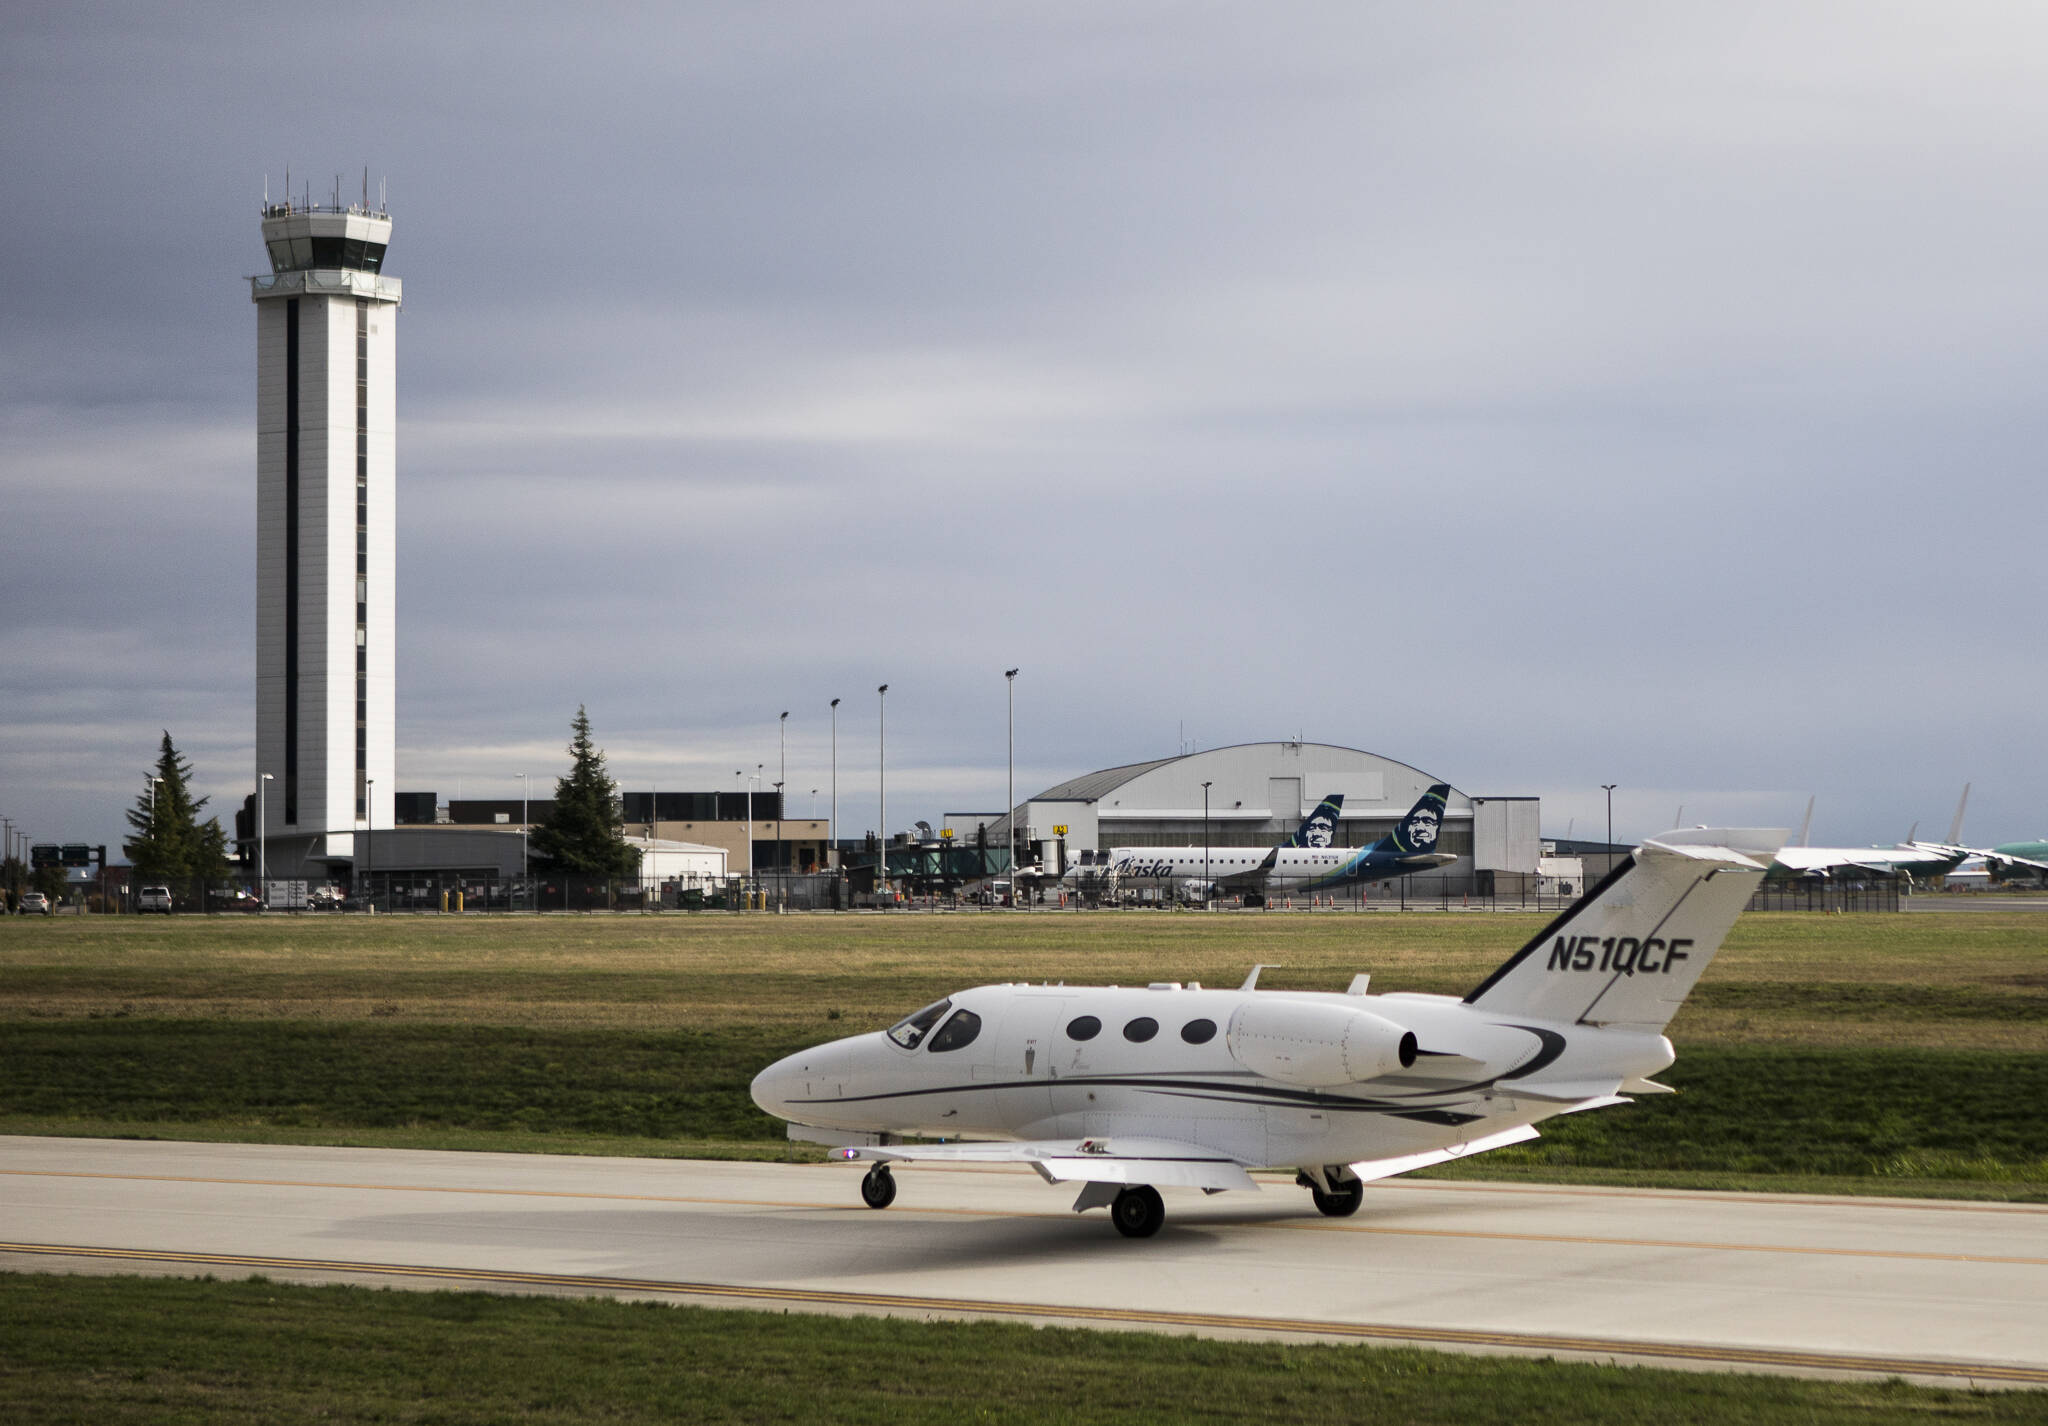 A private plane taxis past the Paine Field tower and passenger terminal on Wednesday in Everett. (Olivia Vanni / The Herald)